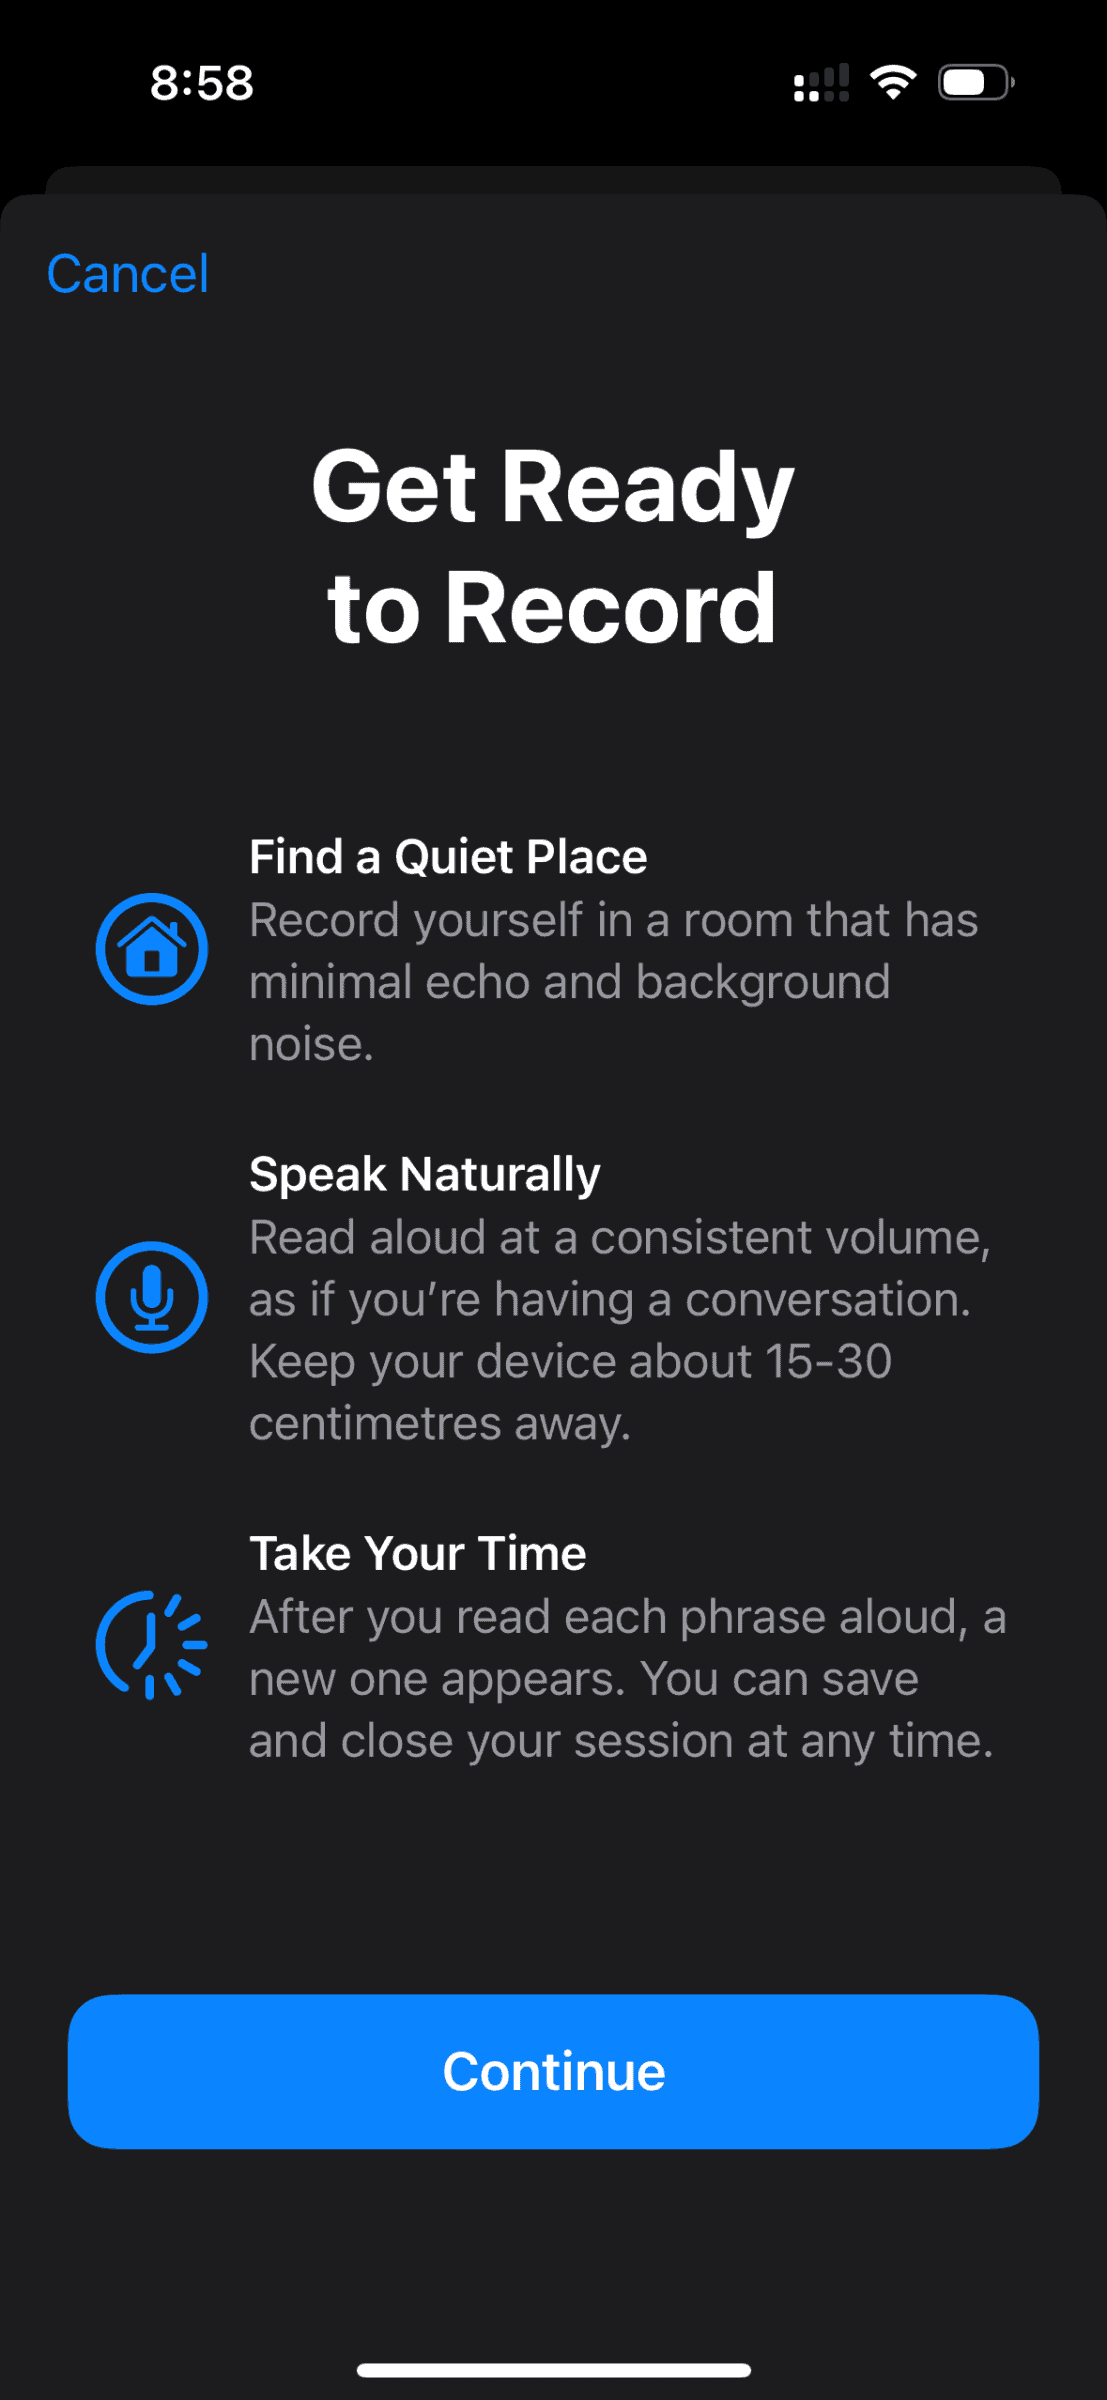 Screenshot of instruction of how to create a Personal Voice on iPhone.